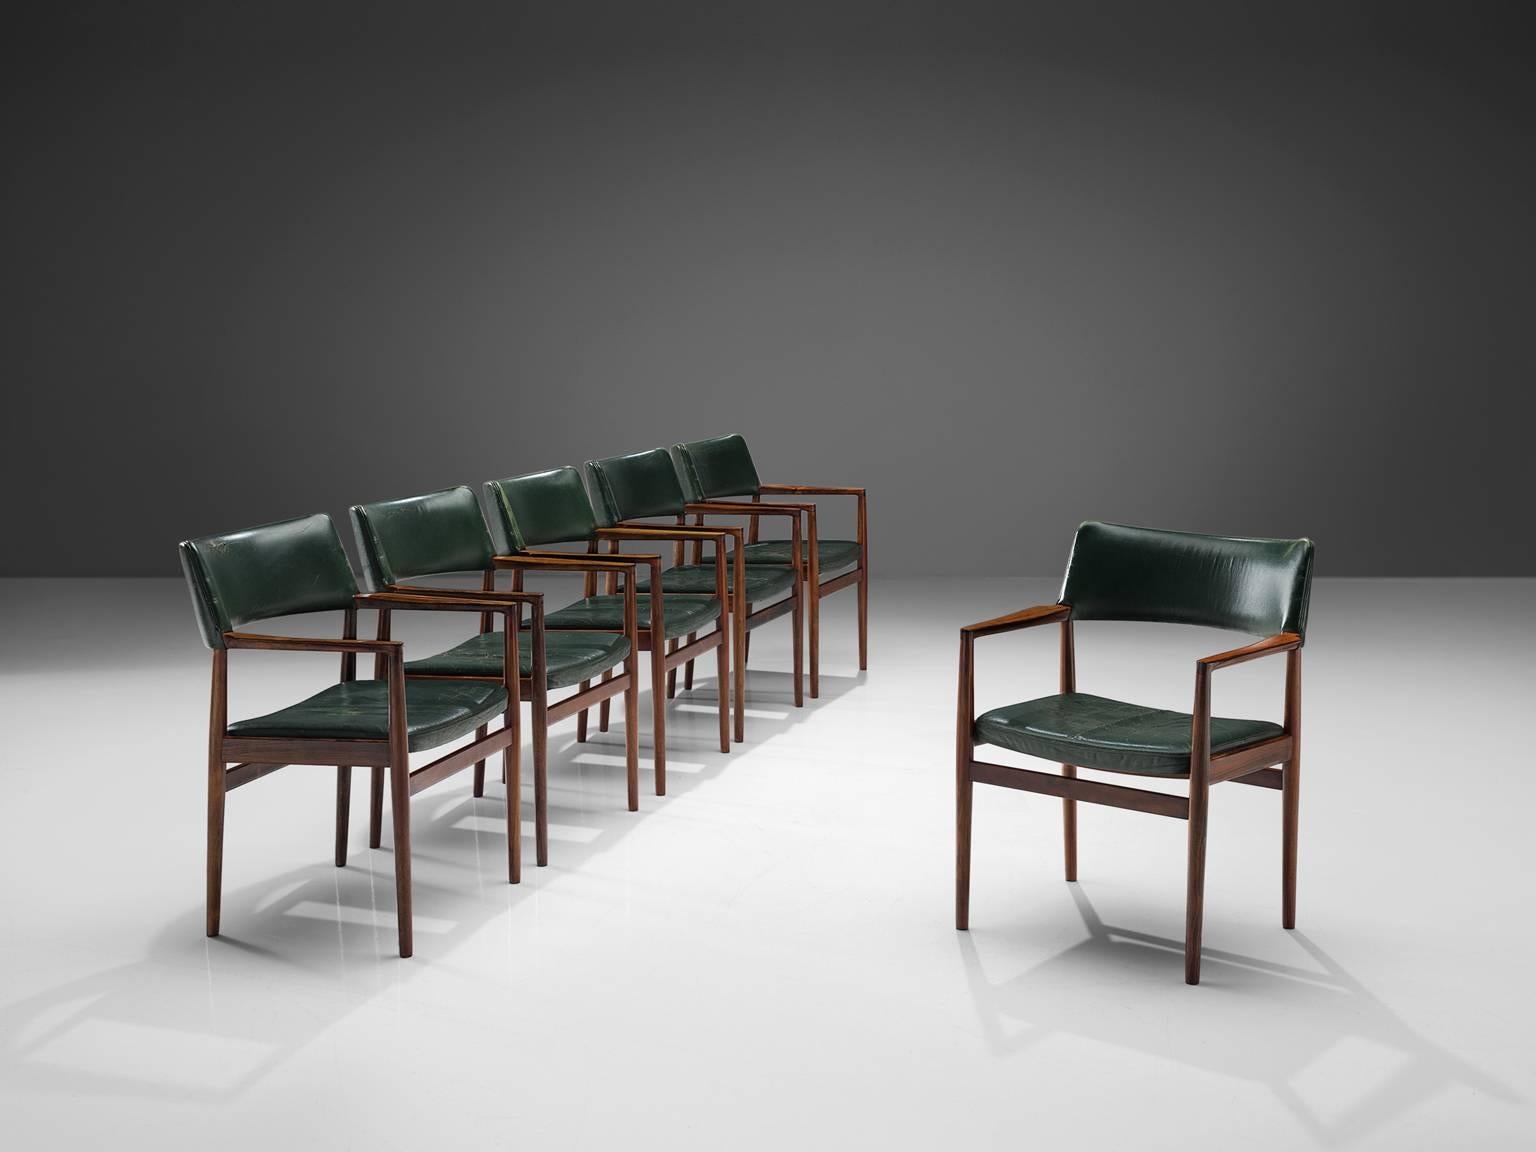 Bondo Gravesen, set of 6 armchairs, leather and rosewood, Denmark, 1960s

Classic armchairs designed by Bondo Gravesen. The chairs maintain the original dark green leather, which is in fair condition with a rich patina. The lacquered rosewood and